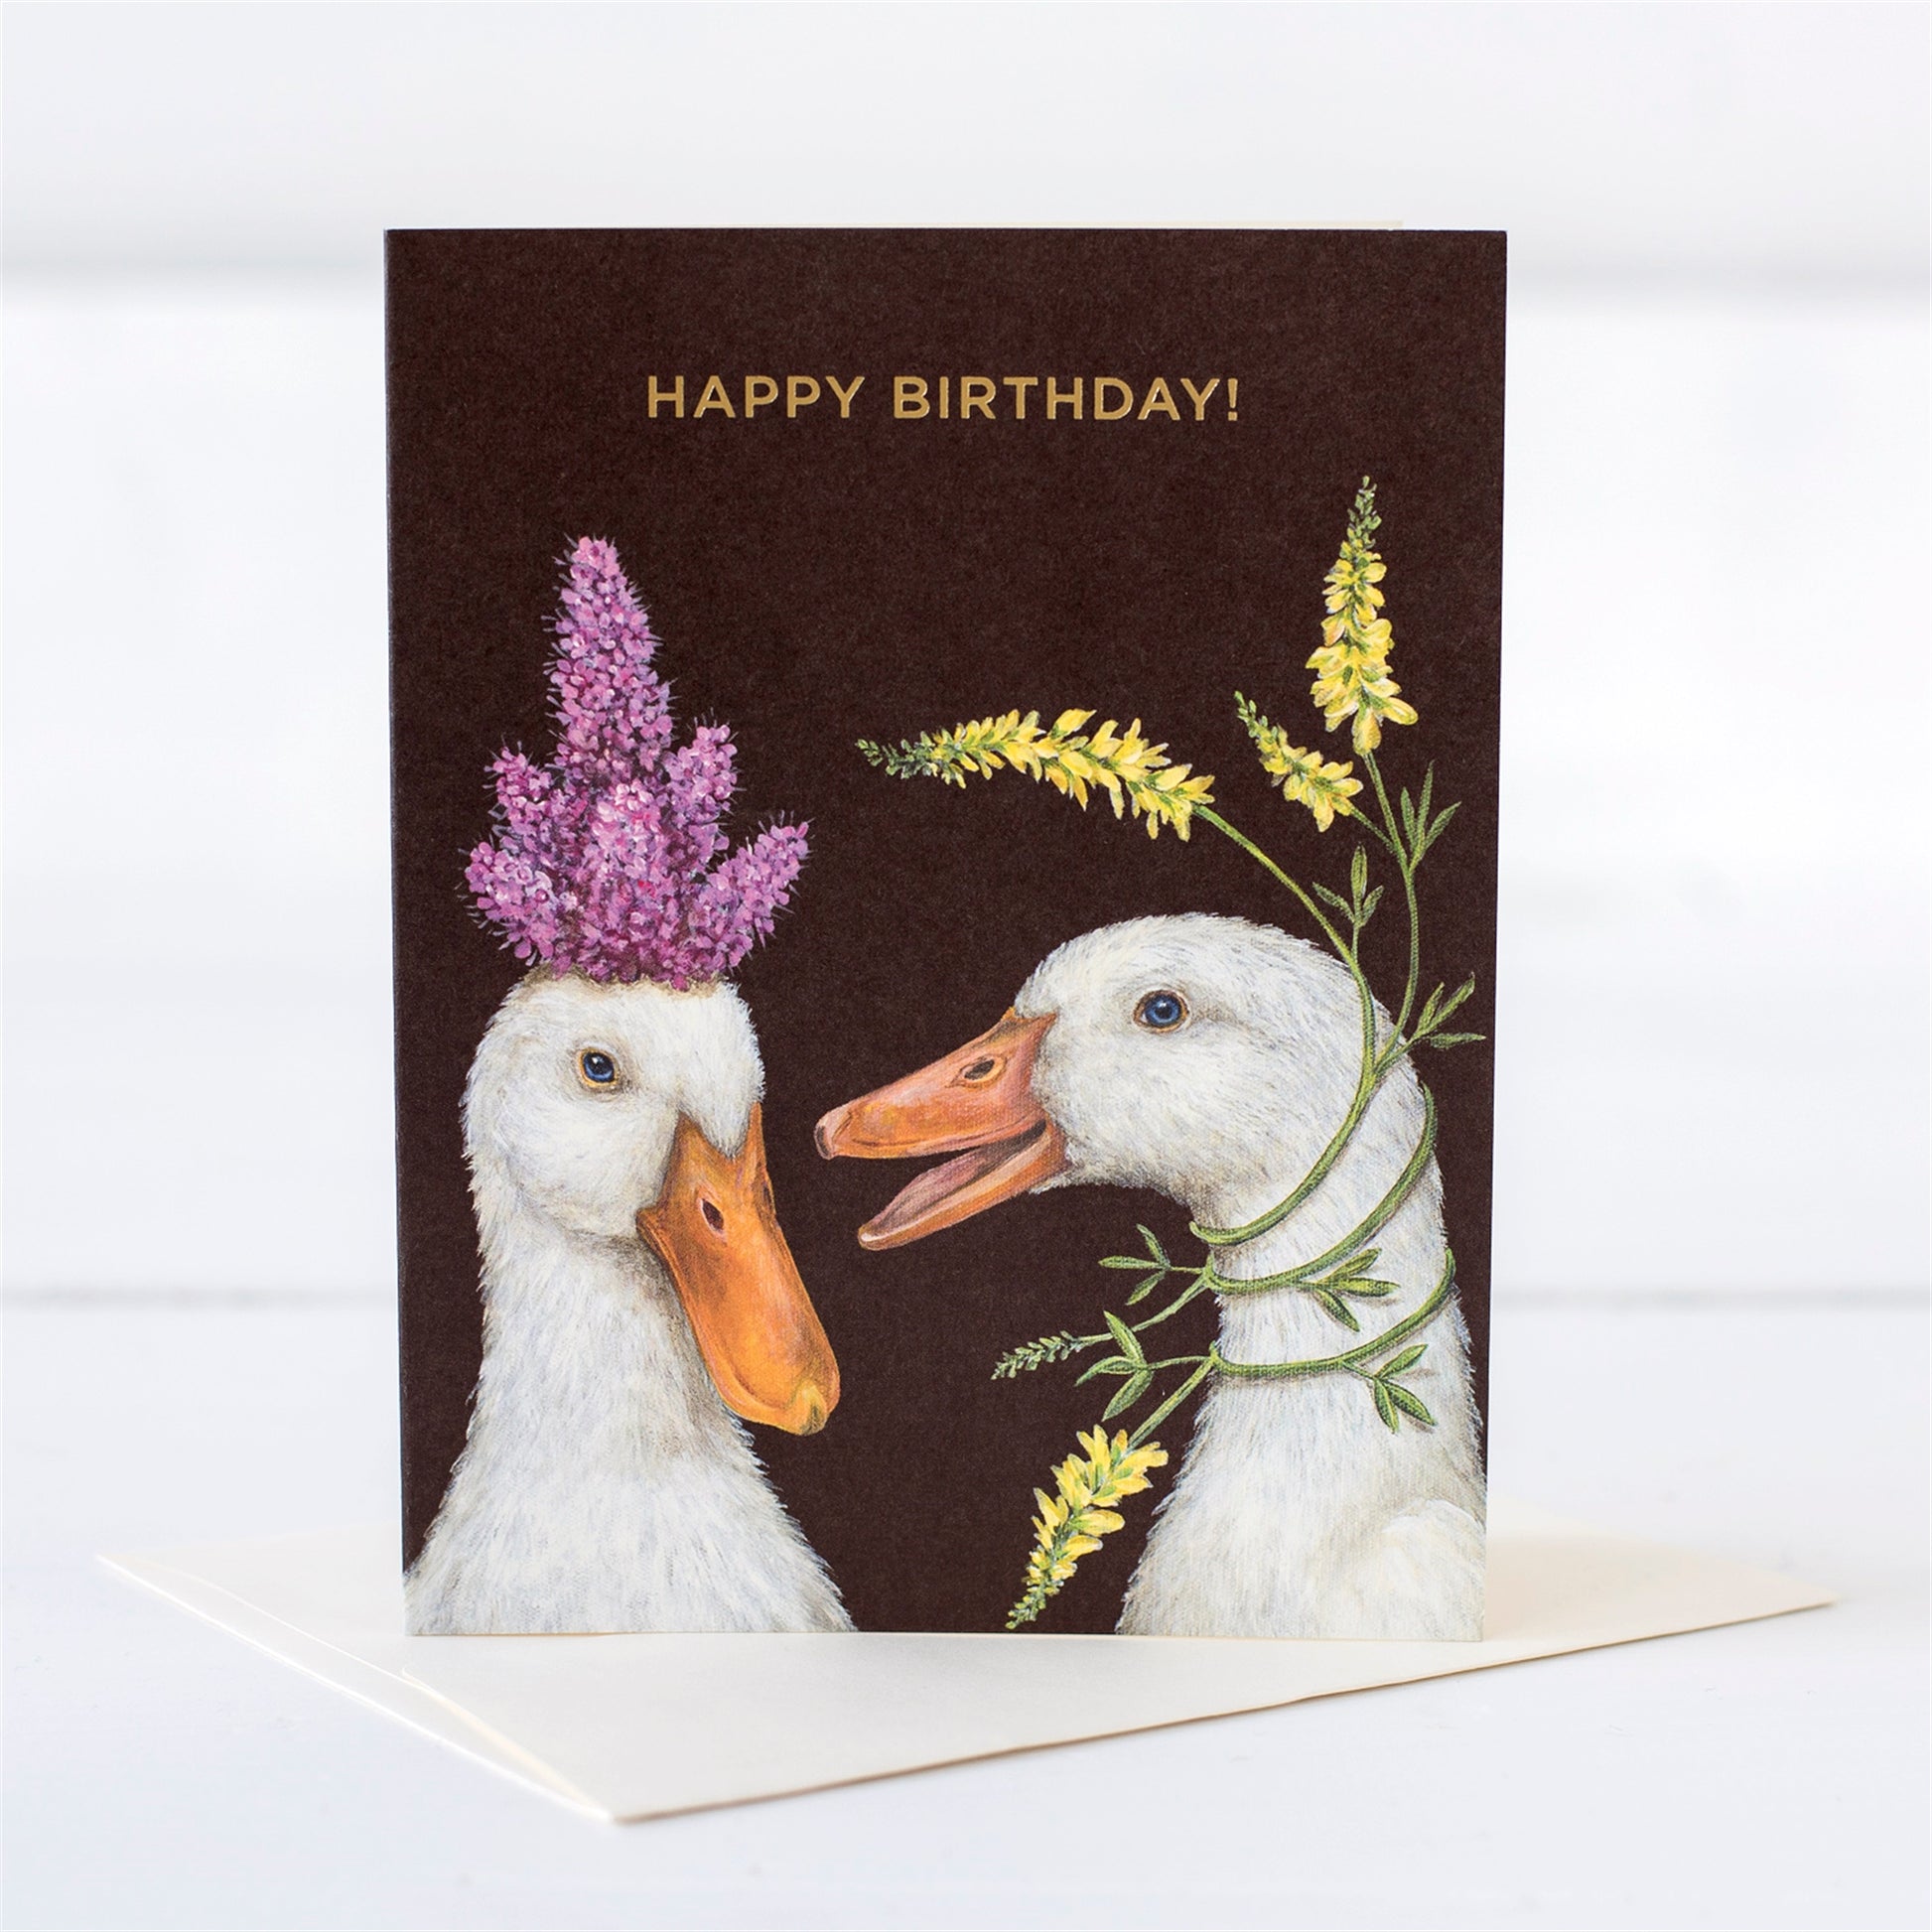 Two white ducks with flowers on their head as hats wishing a happy birthday